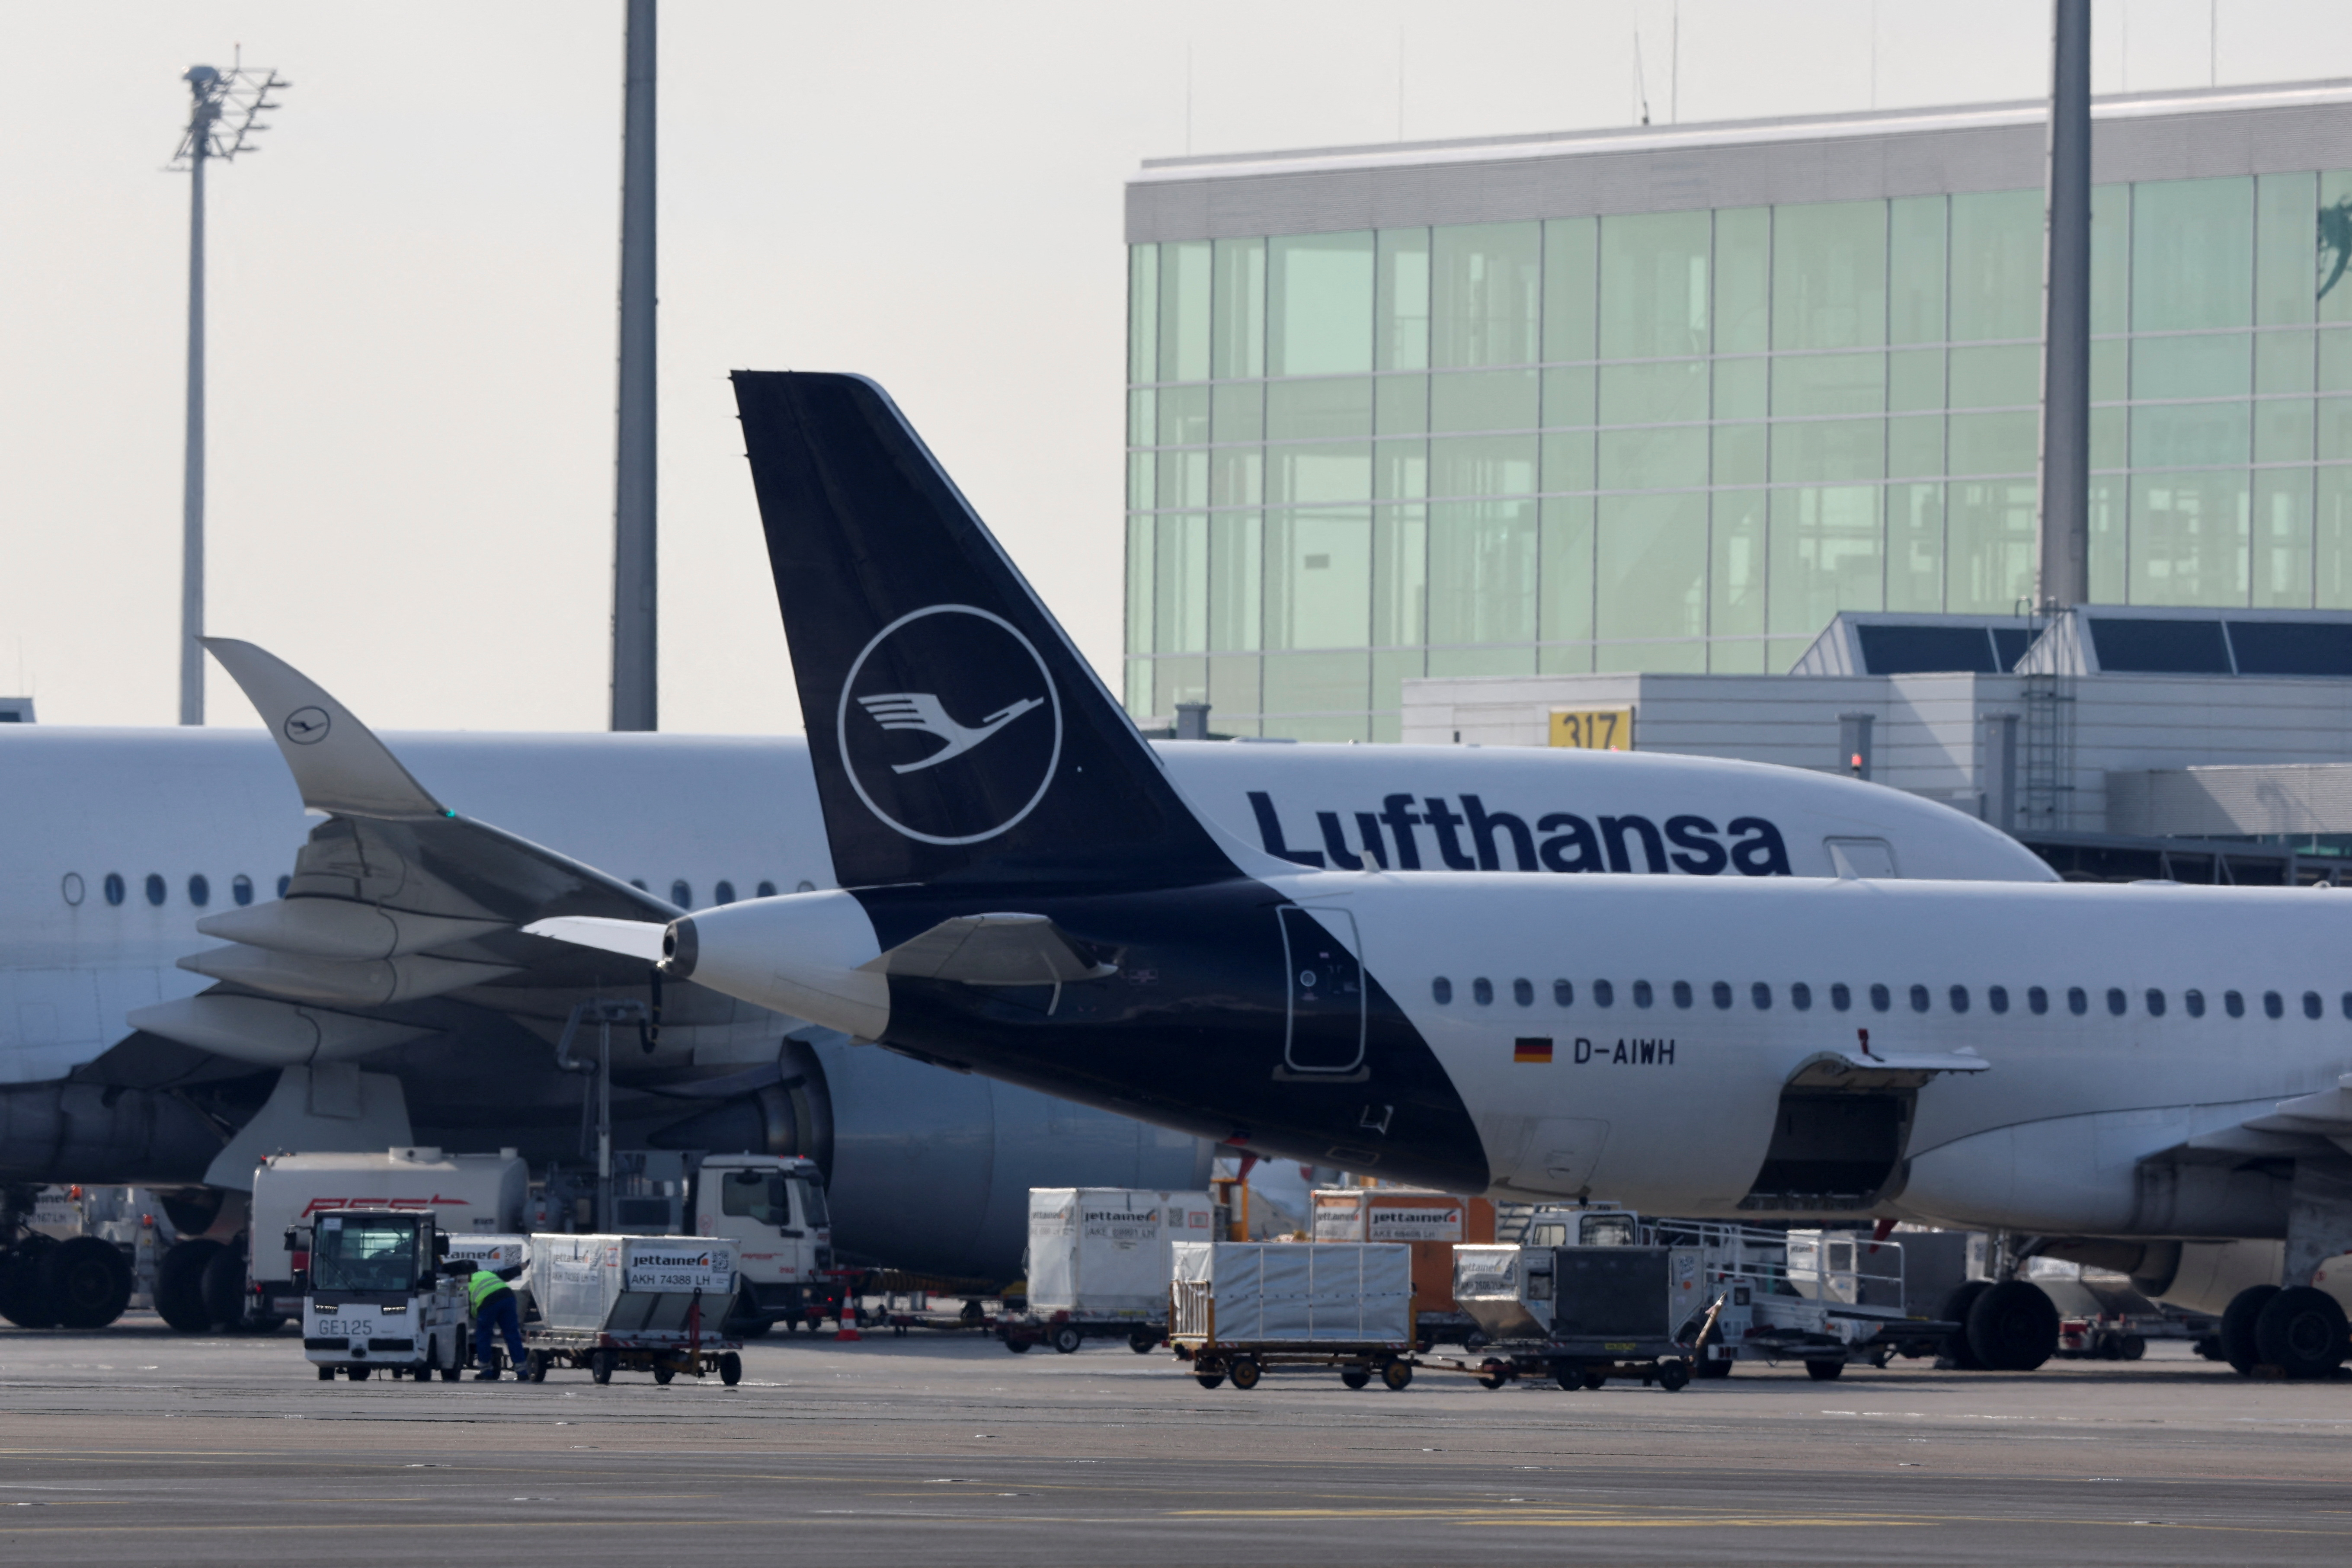 Lufthansa's aircrafts are seen on the tarmac at the Munich International Airport